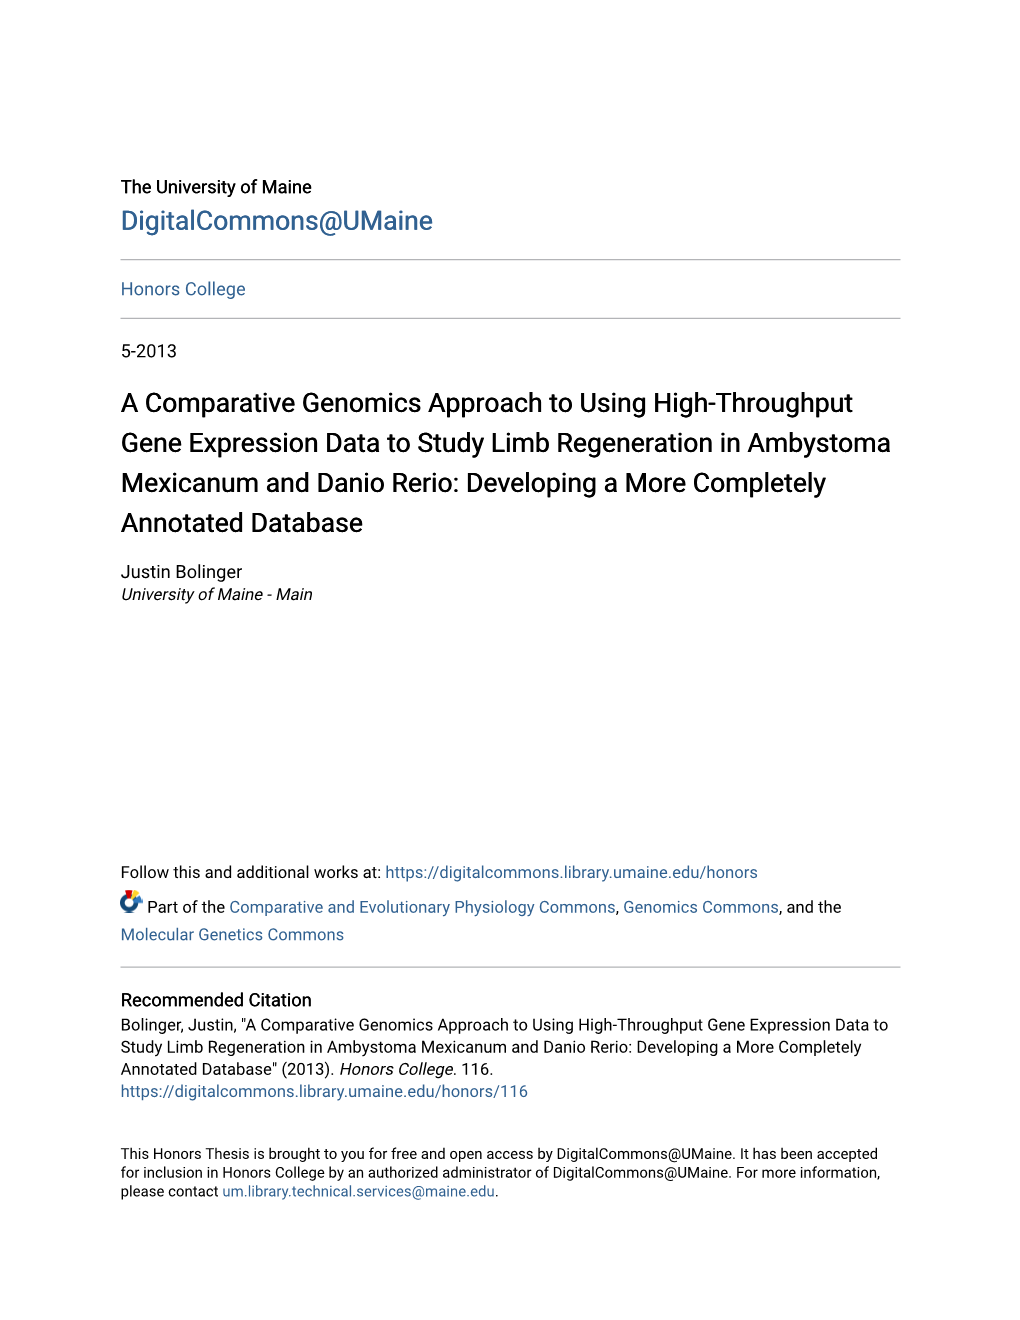 A Comparative Genomics Approach to Using High-Throughput